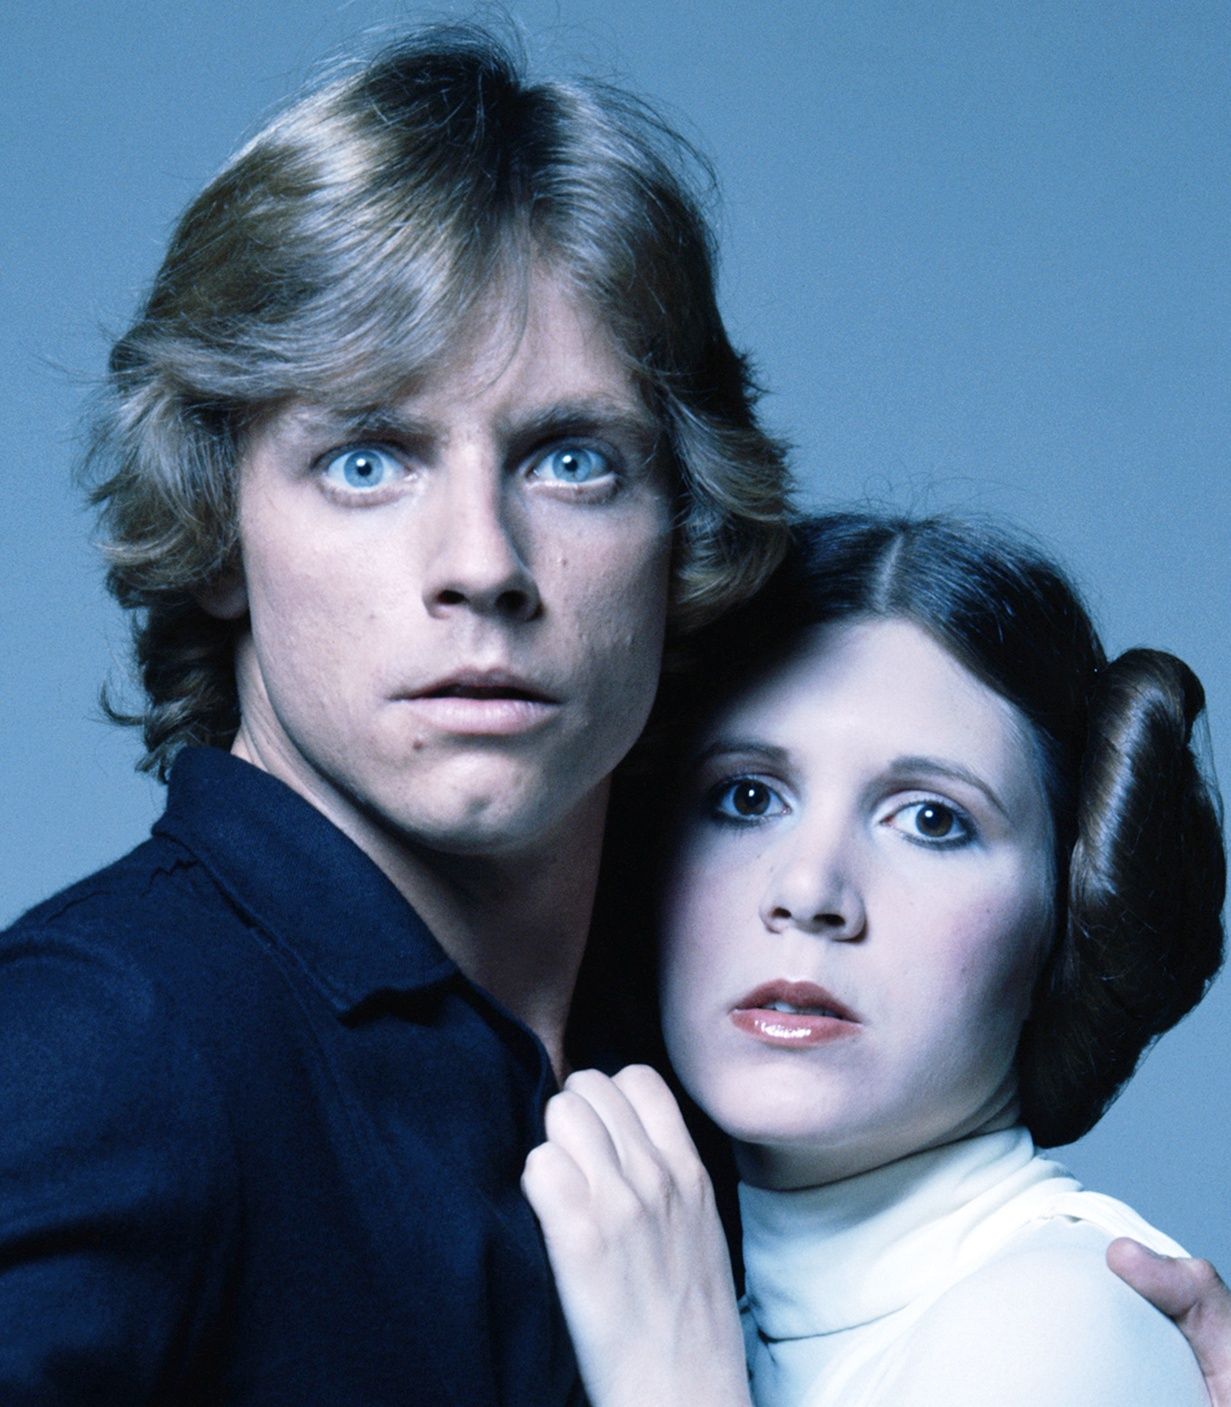 Mark Hamill as Luke Skywalker and Carrie Fisher as Princess Leia in Star Wars Vertical TLDR